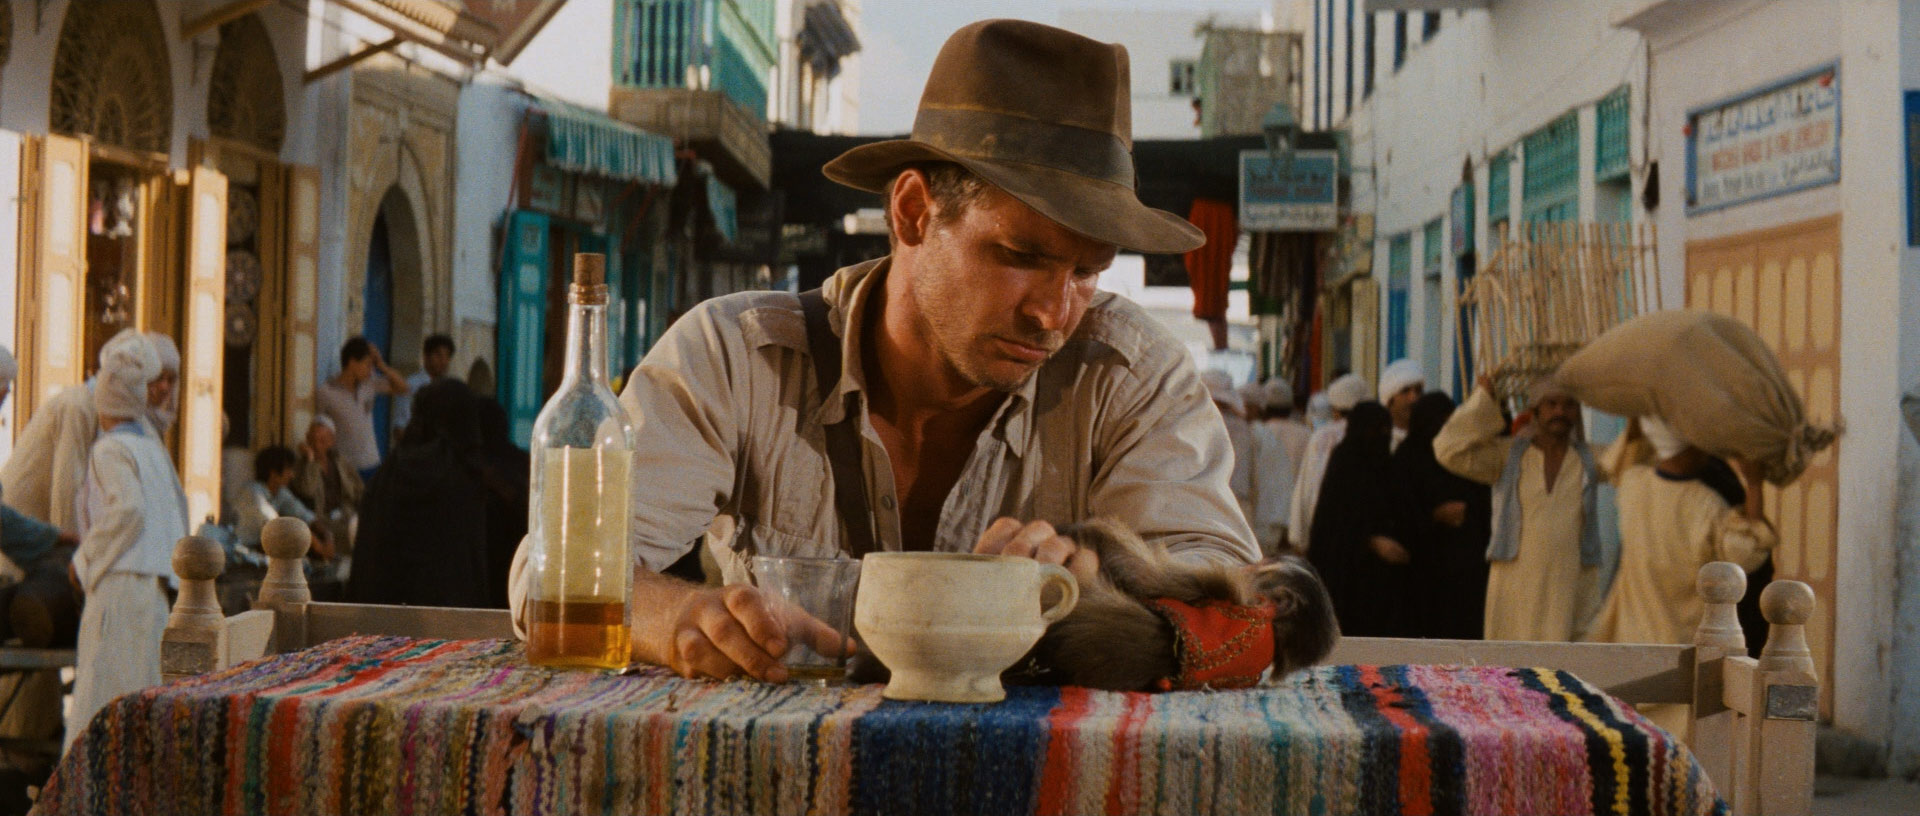 Harrison Ford sits drinking liquor at a table in a bustling middle eastern street